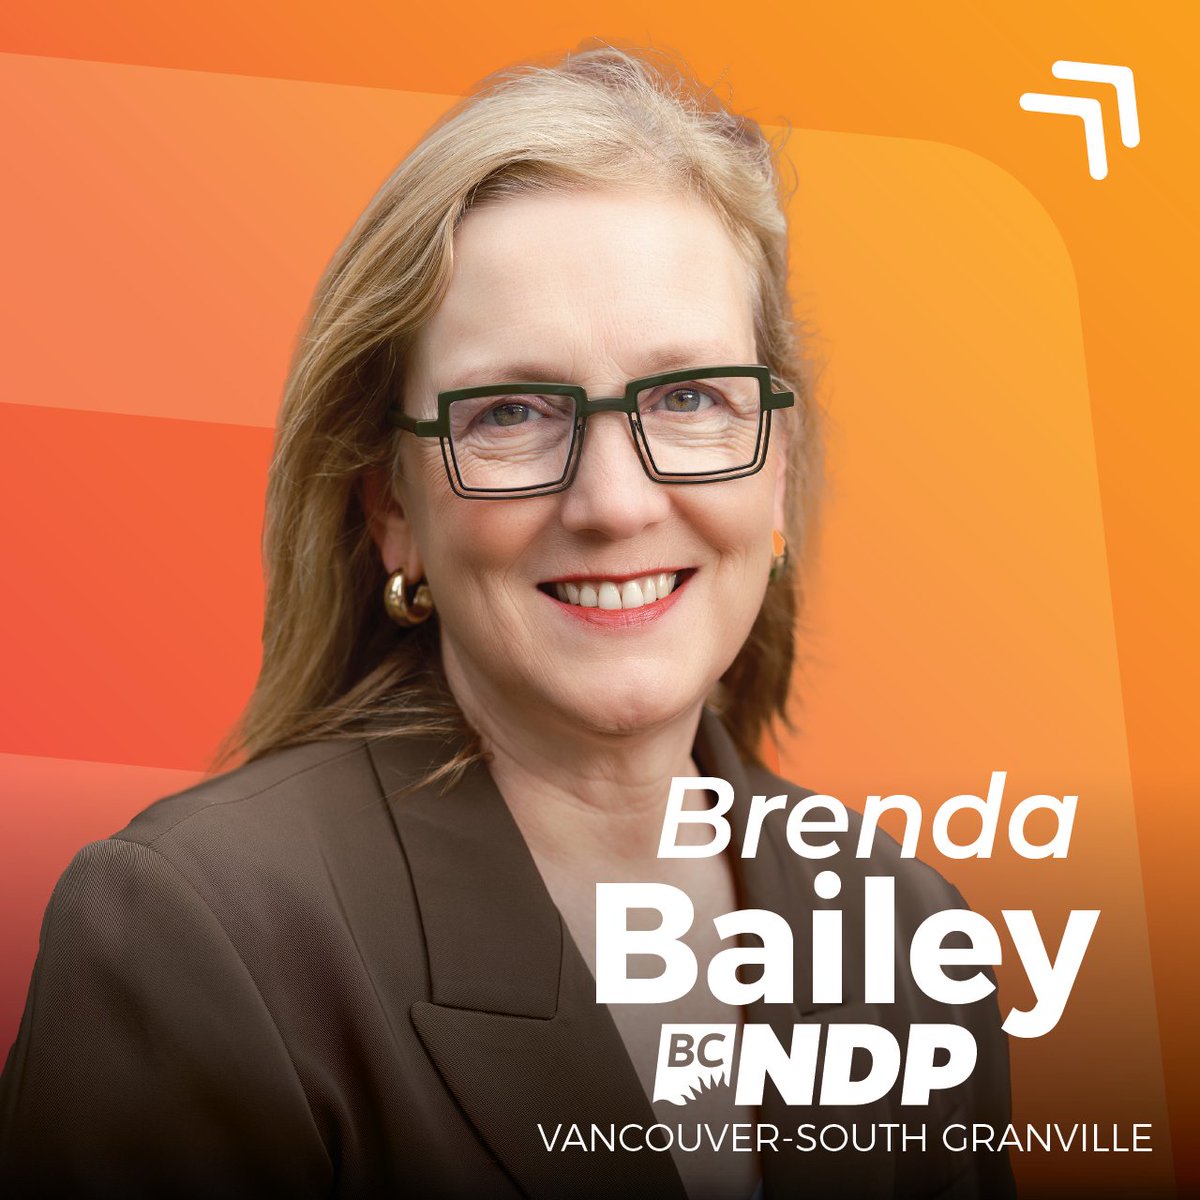 Please join us in welcoming Brenda Bailey as our BC NDP candidate in Vancouver-South Granville. Co-founder of Canada's first women-owned and operated video game studio, Brenda currently serves the Minister of Jobs, Economic Development and Innovation. Welcome @BrendaBaileyBC!